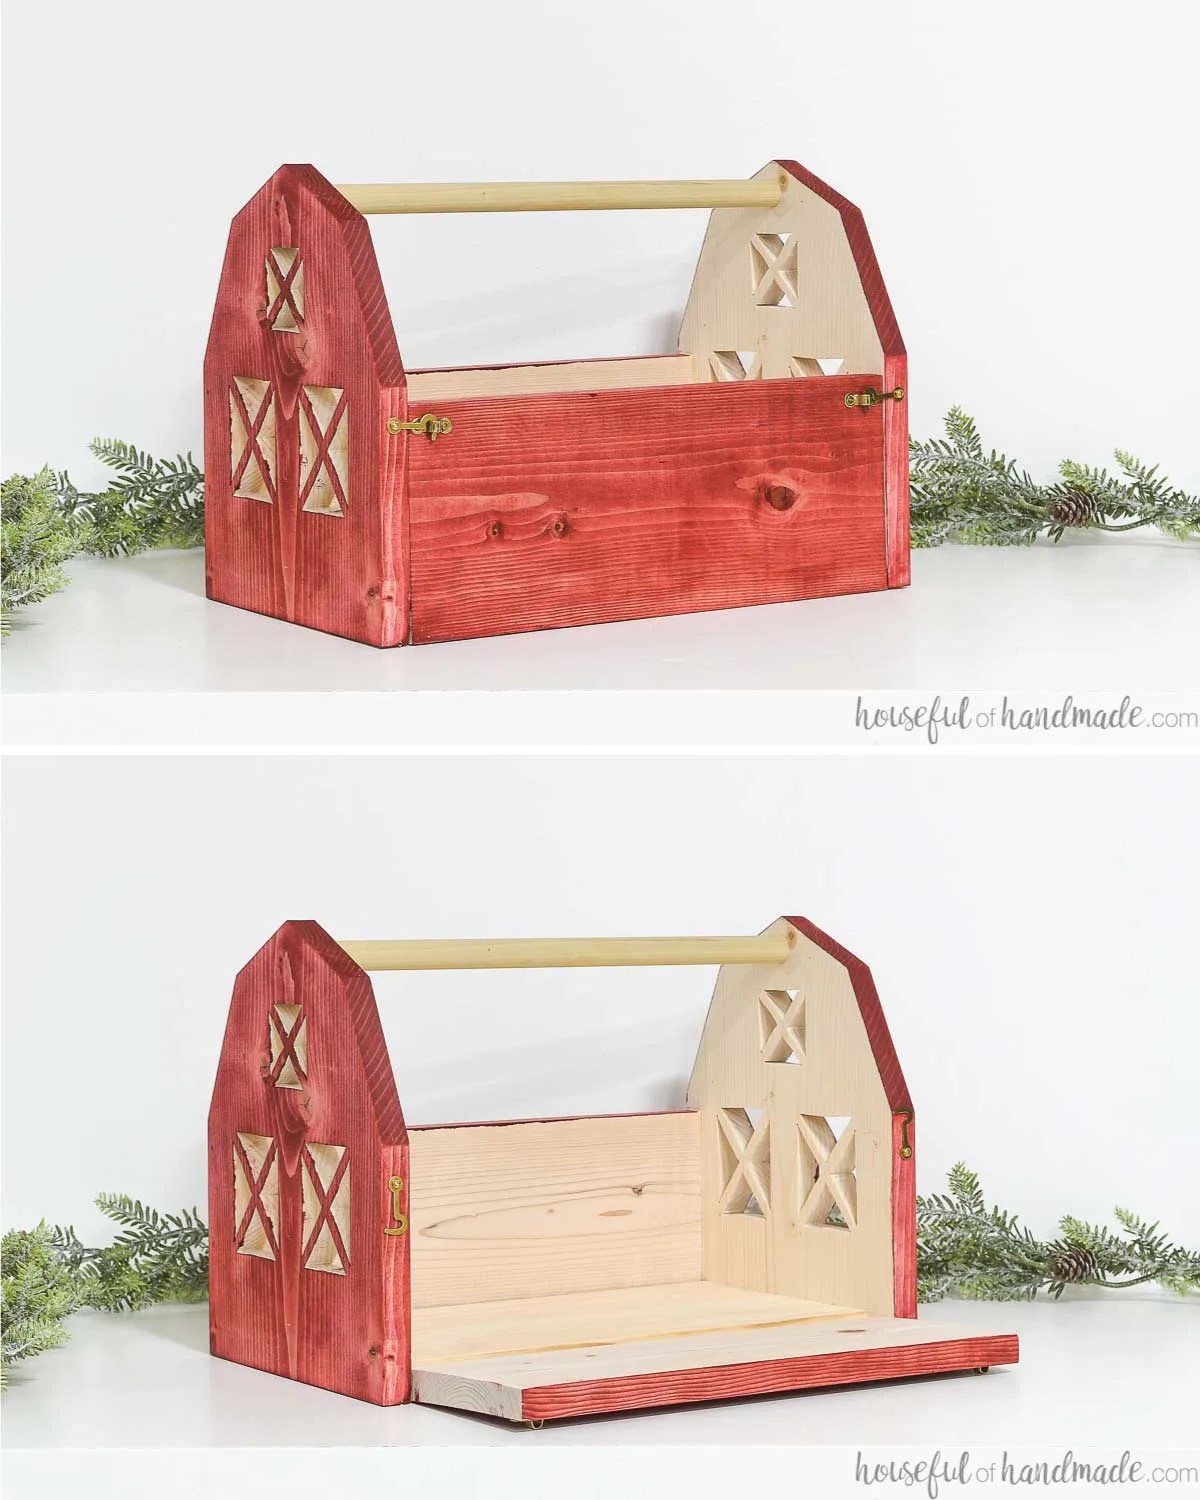 Wooden barn toy with one side that opens flat for play but closes to hold the toys inside. 